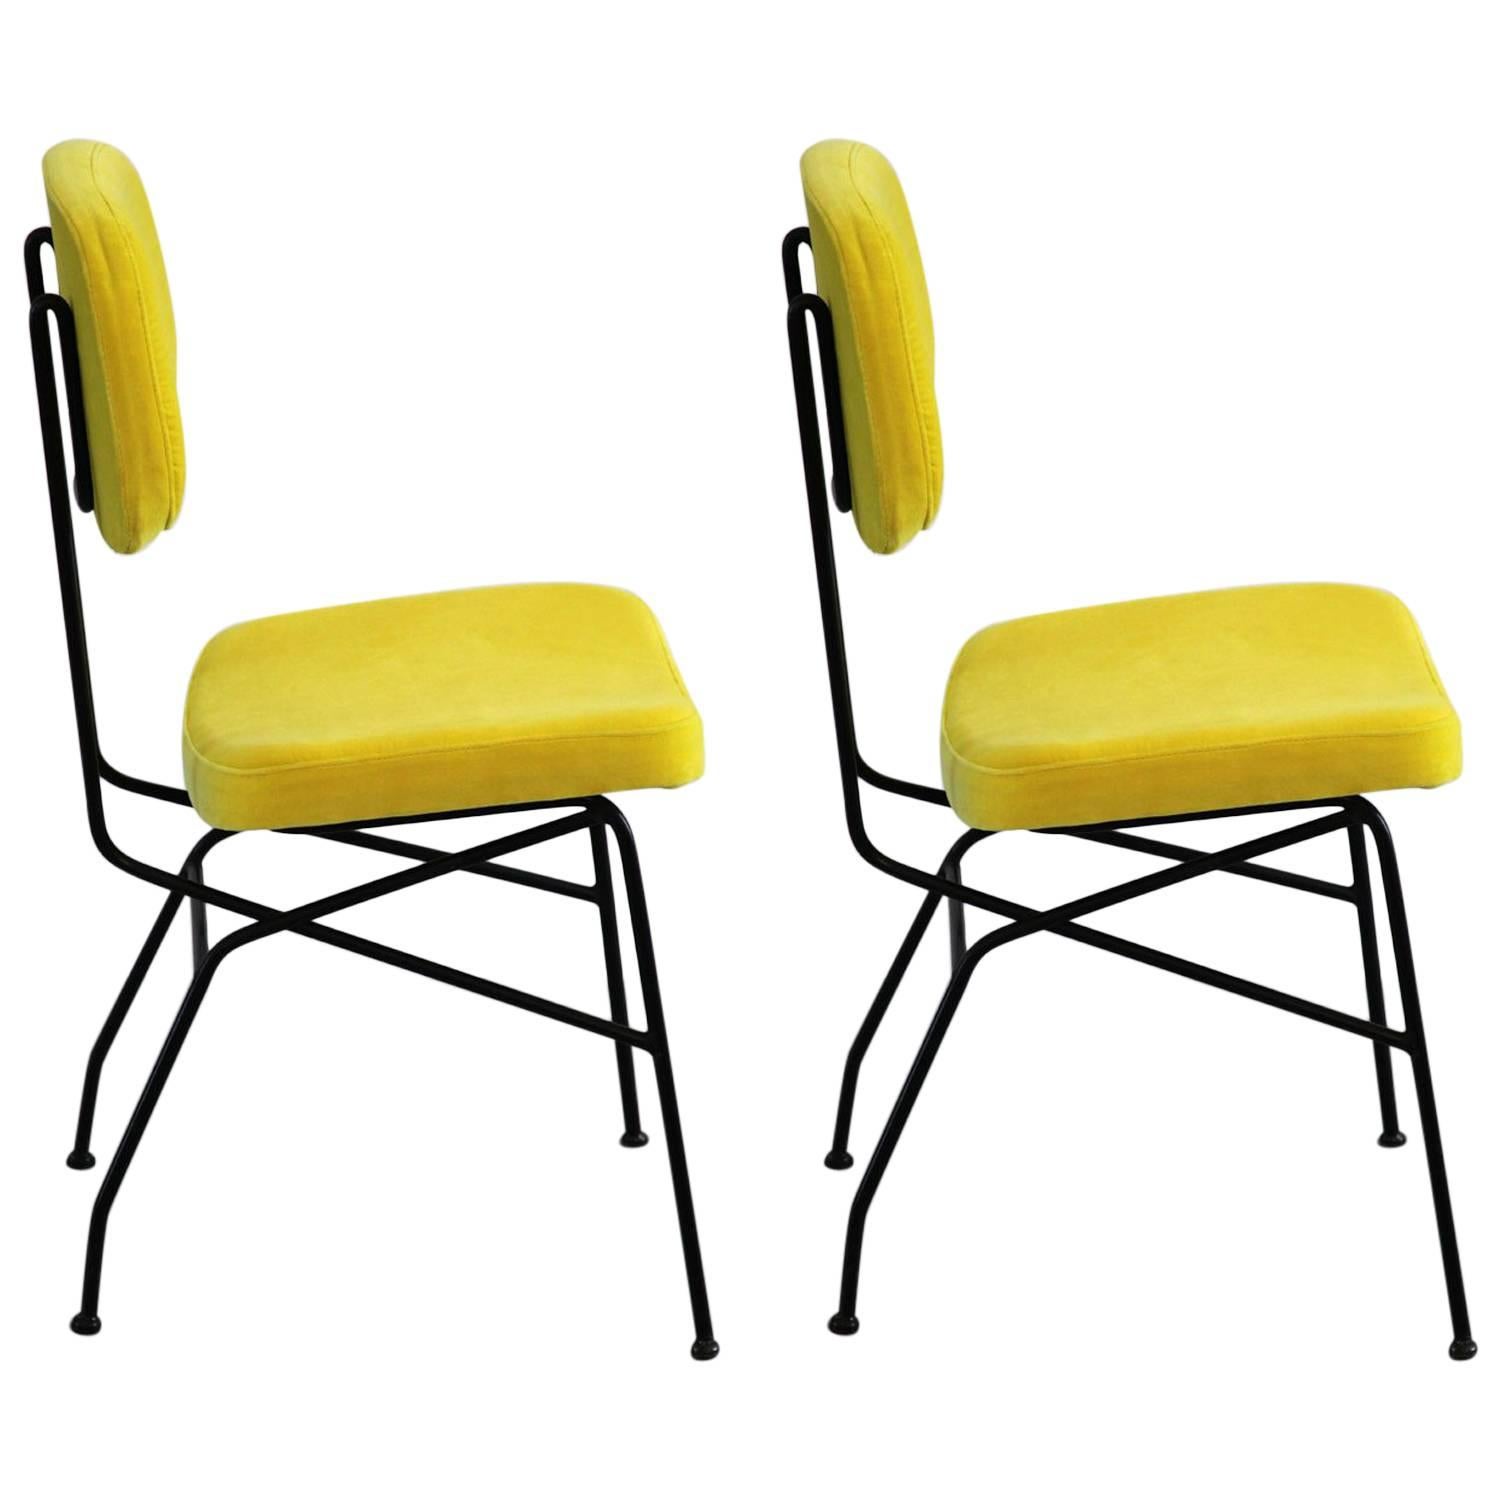 Set of Two Gastone Rinaldi Chairs, 1950s, Italy